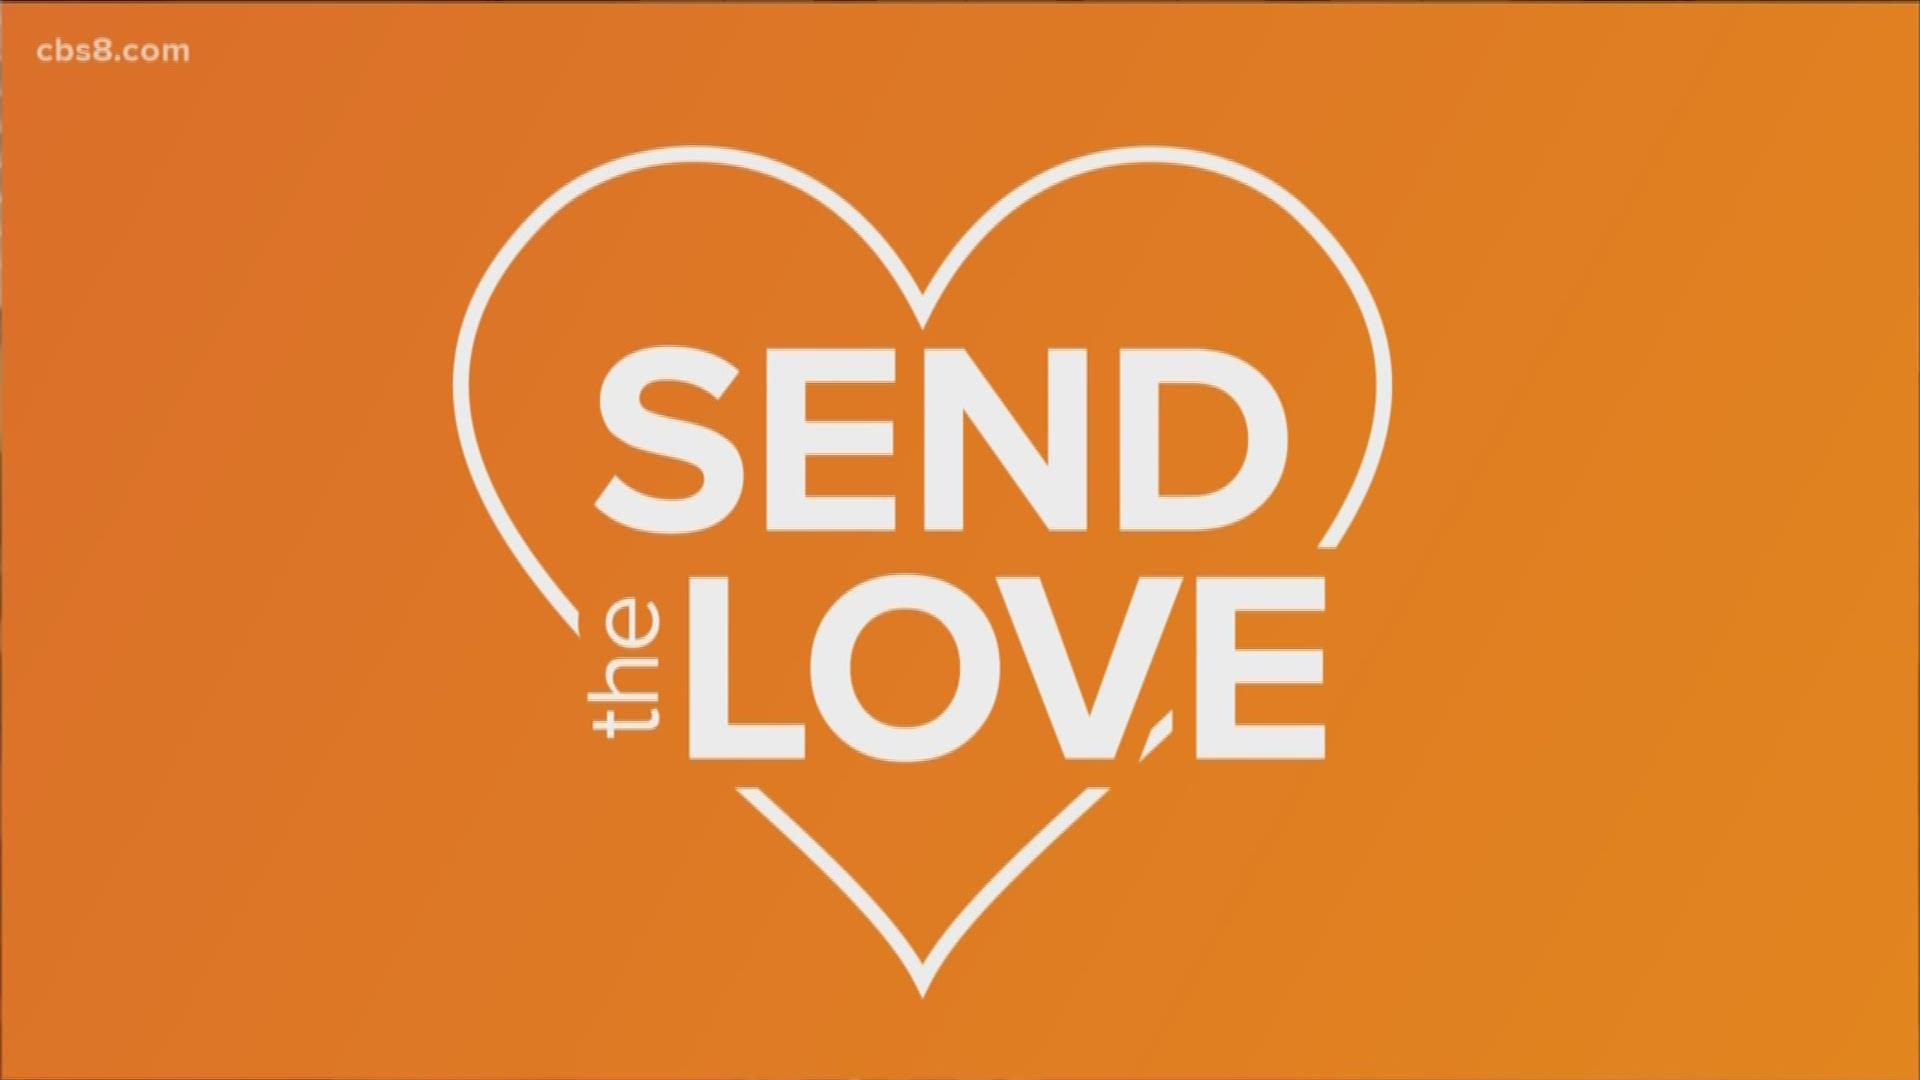 We want to share your heartfelt messages with all of San Diego!